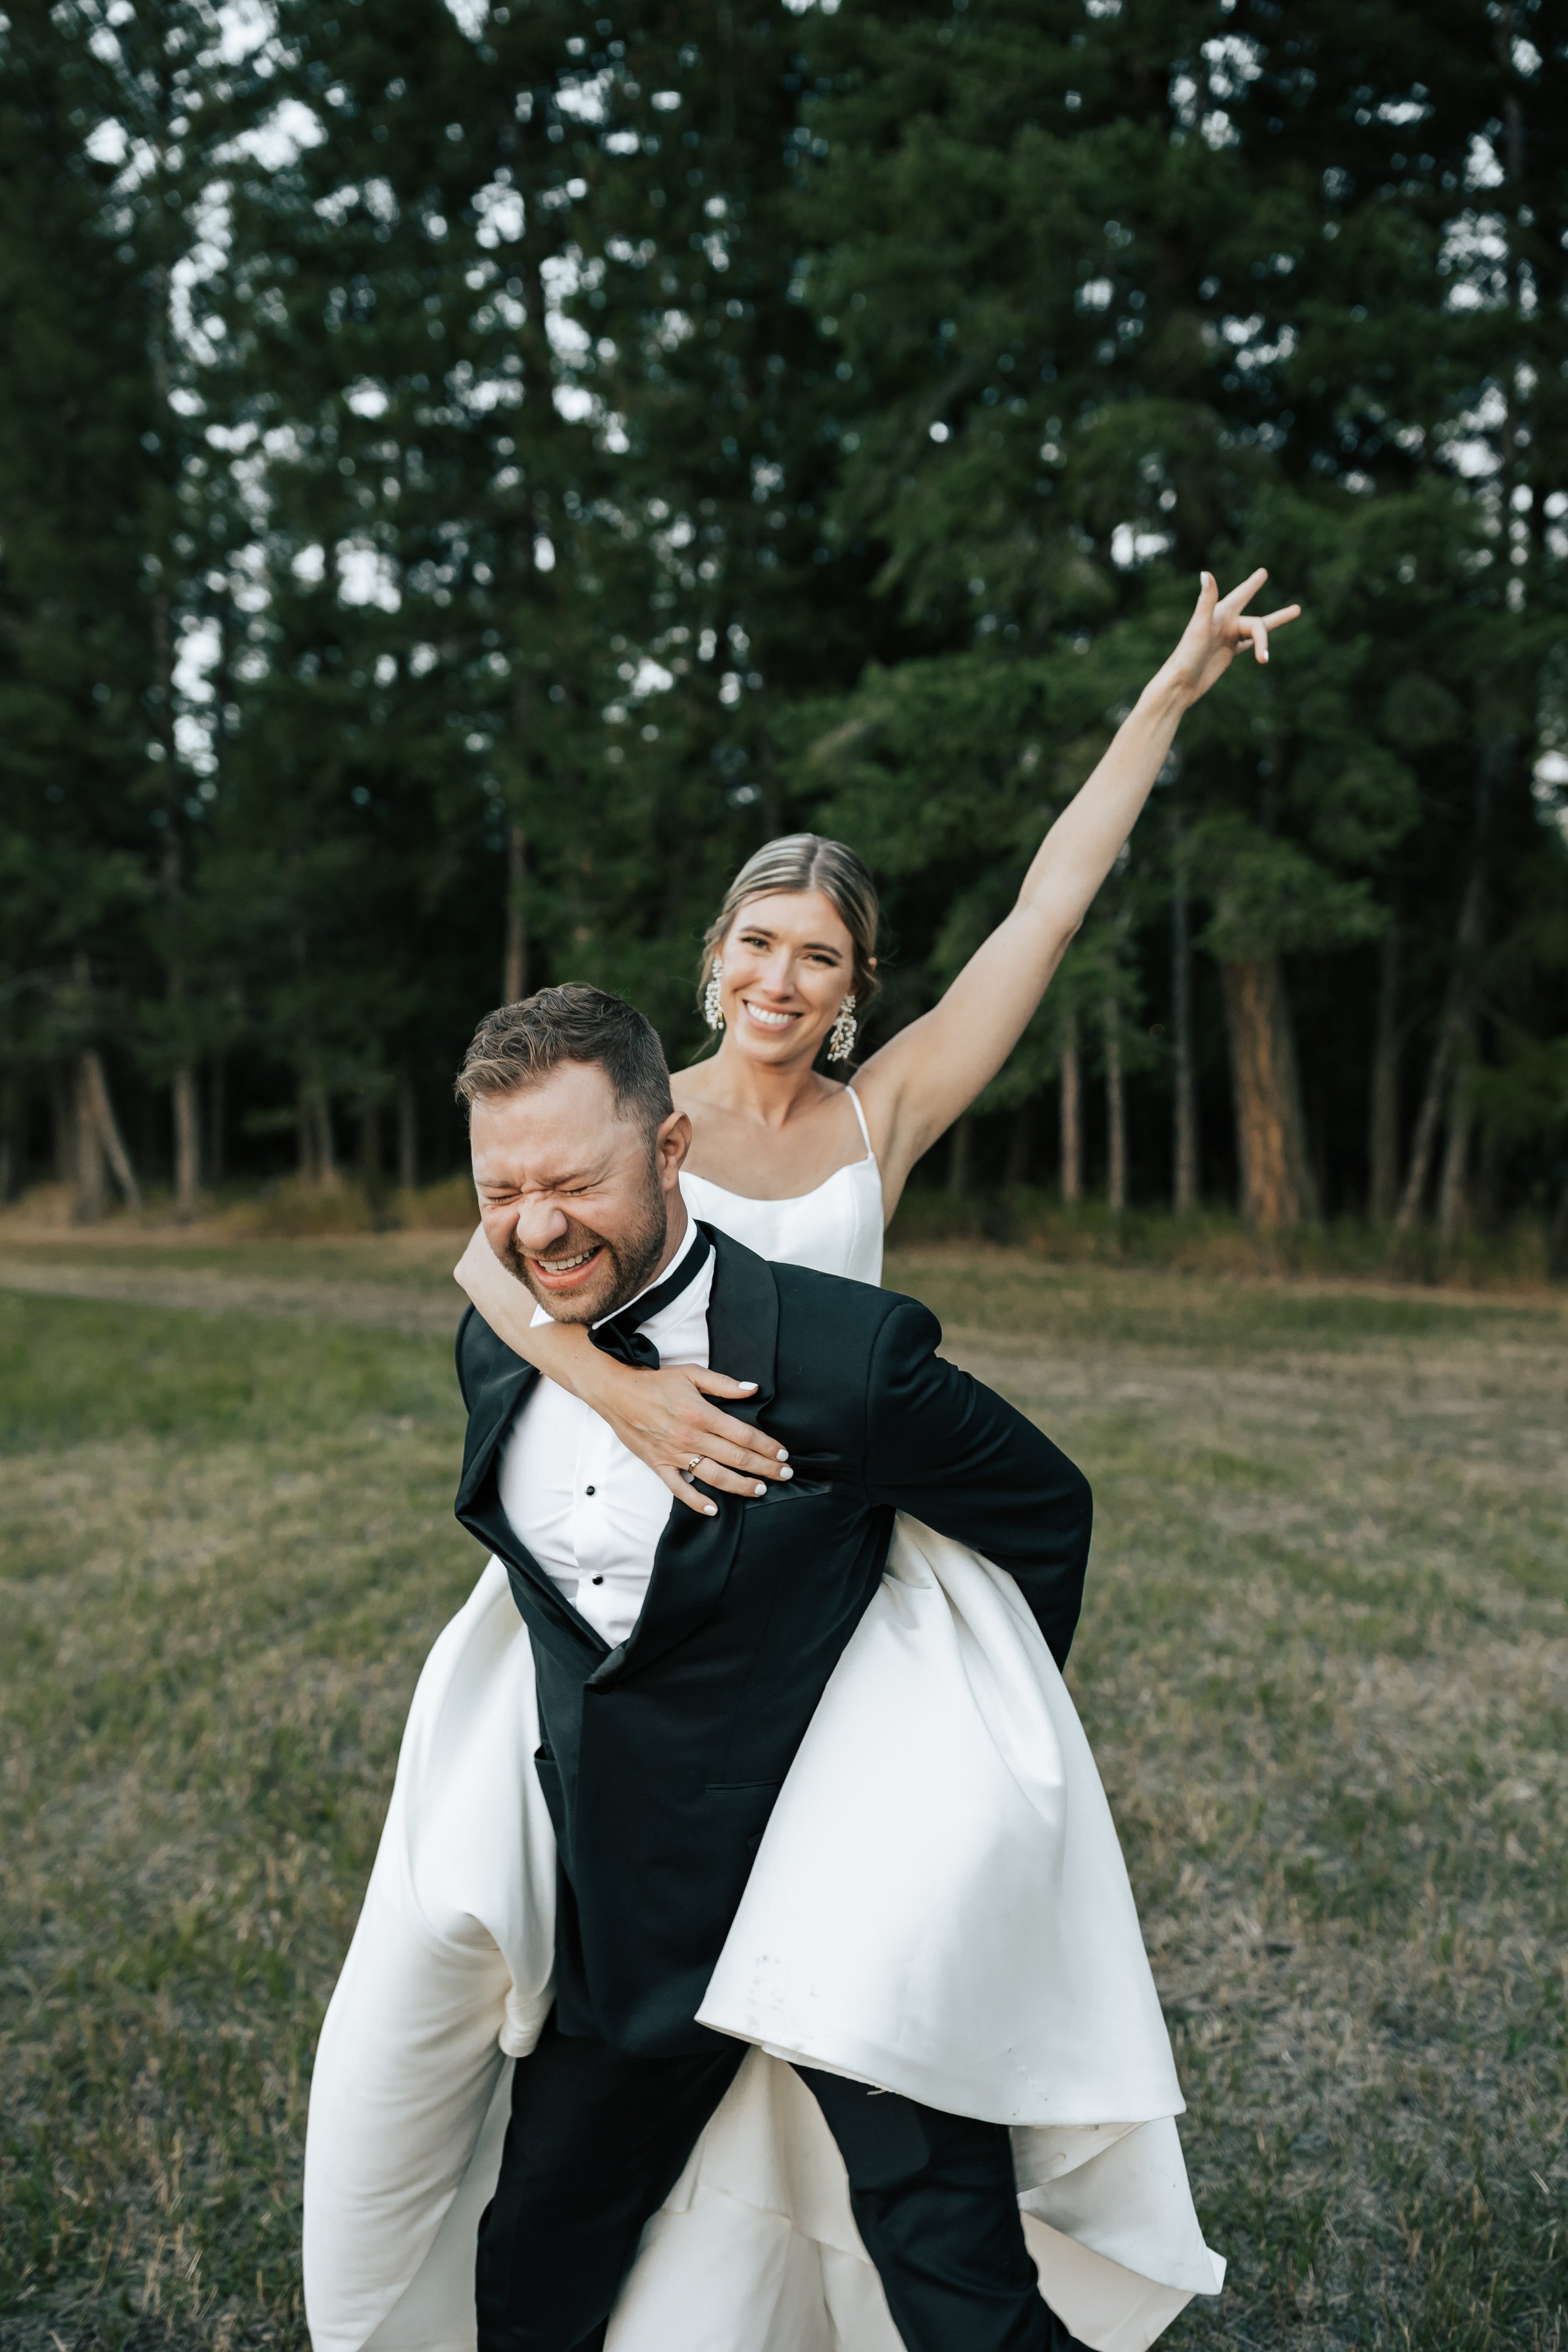  Bride and groom wedding portraits surrounded by beautiful flowers and pine trees. Bride and groom smile at wedding in the forest in Whitefish, Montana. Wedding inspo. Bride is wearing gorgeous large white earrings with a strappy wedding dress and ve